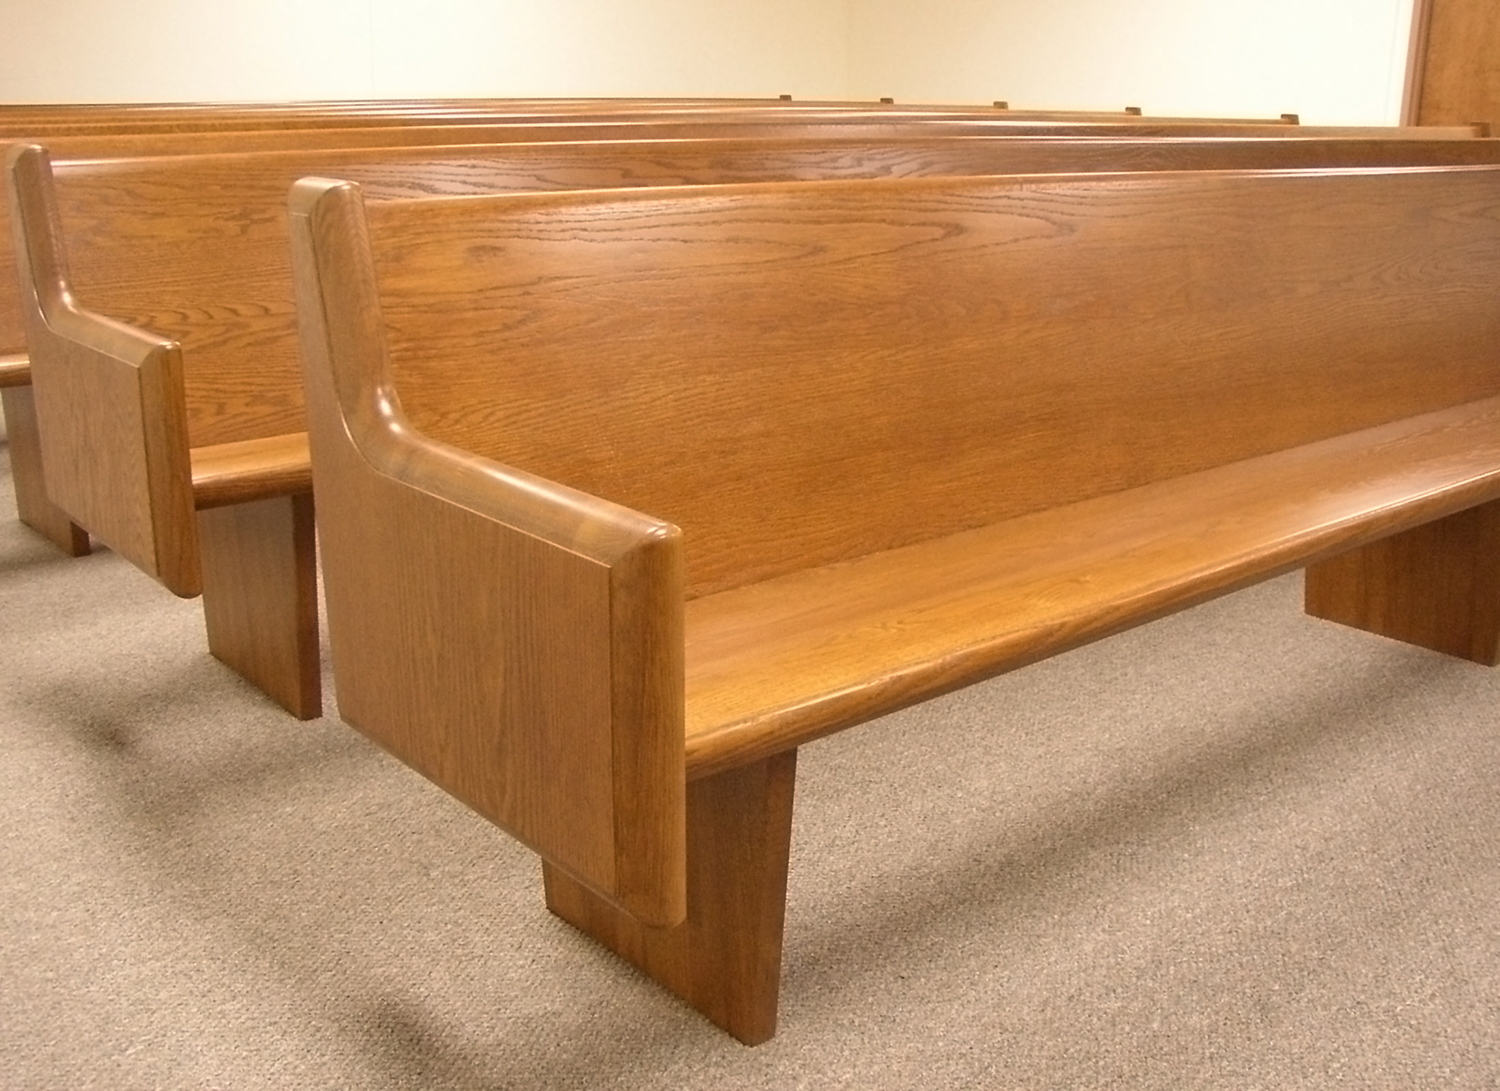 All Wood Benches inside Miller County Courthouse - Texarkana, TX